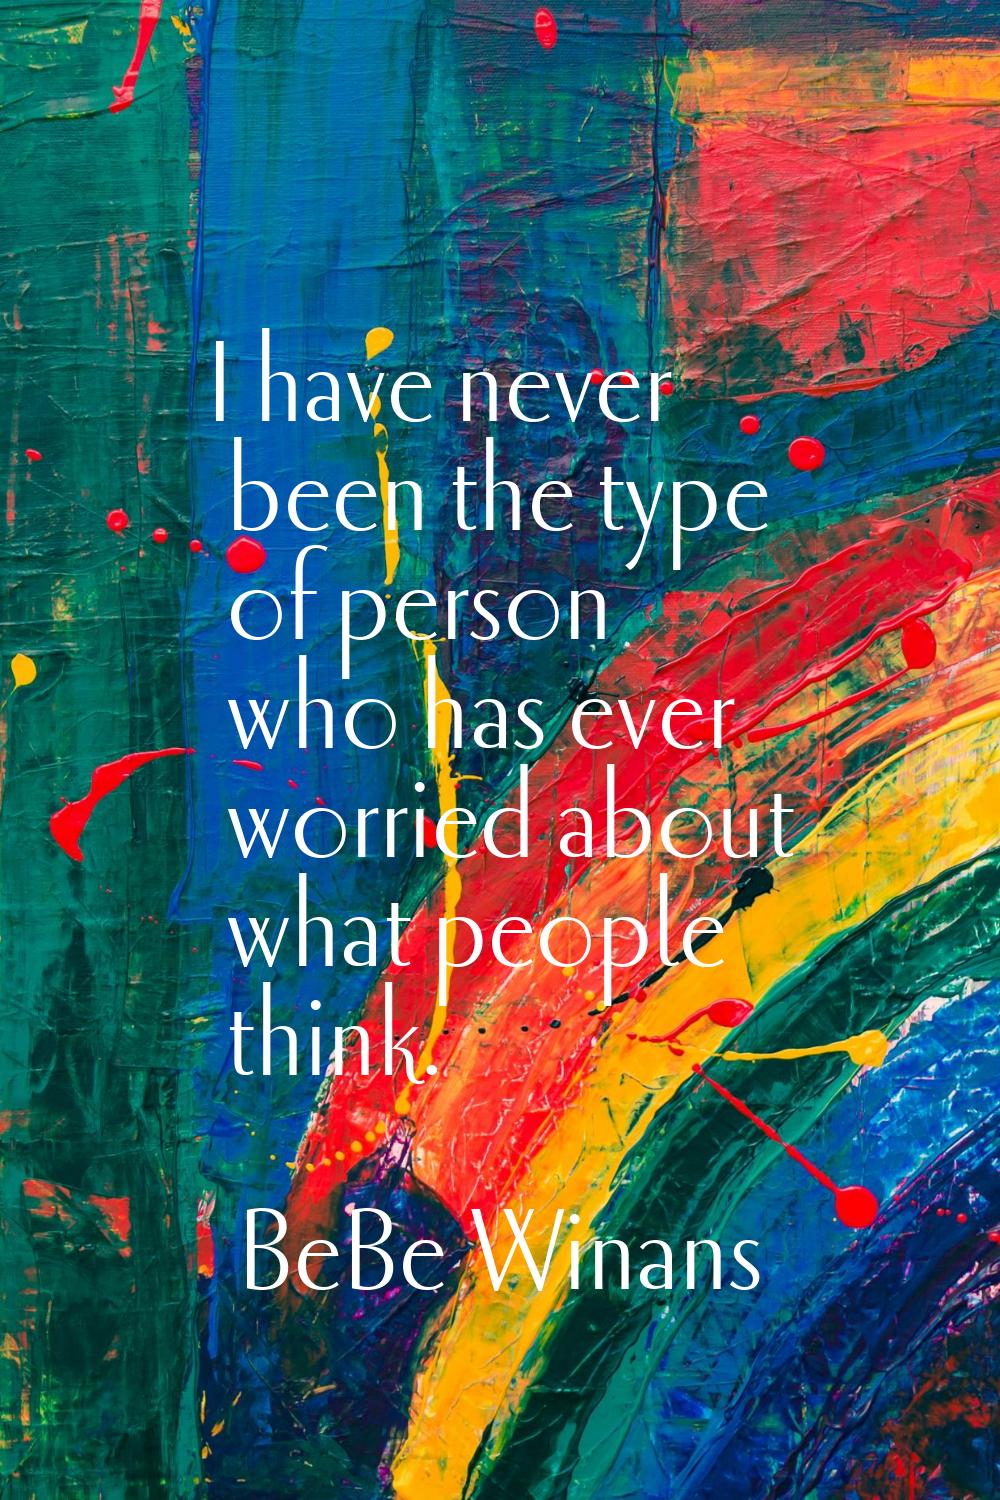 I have never been the type of person who has ever worried about what people think.